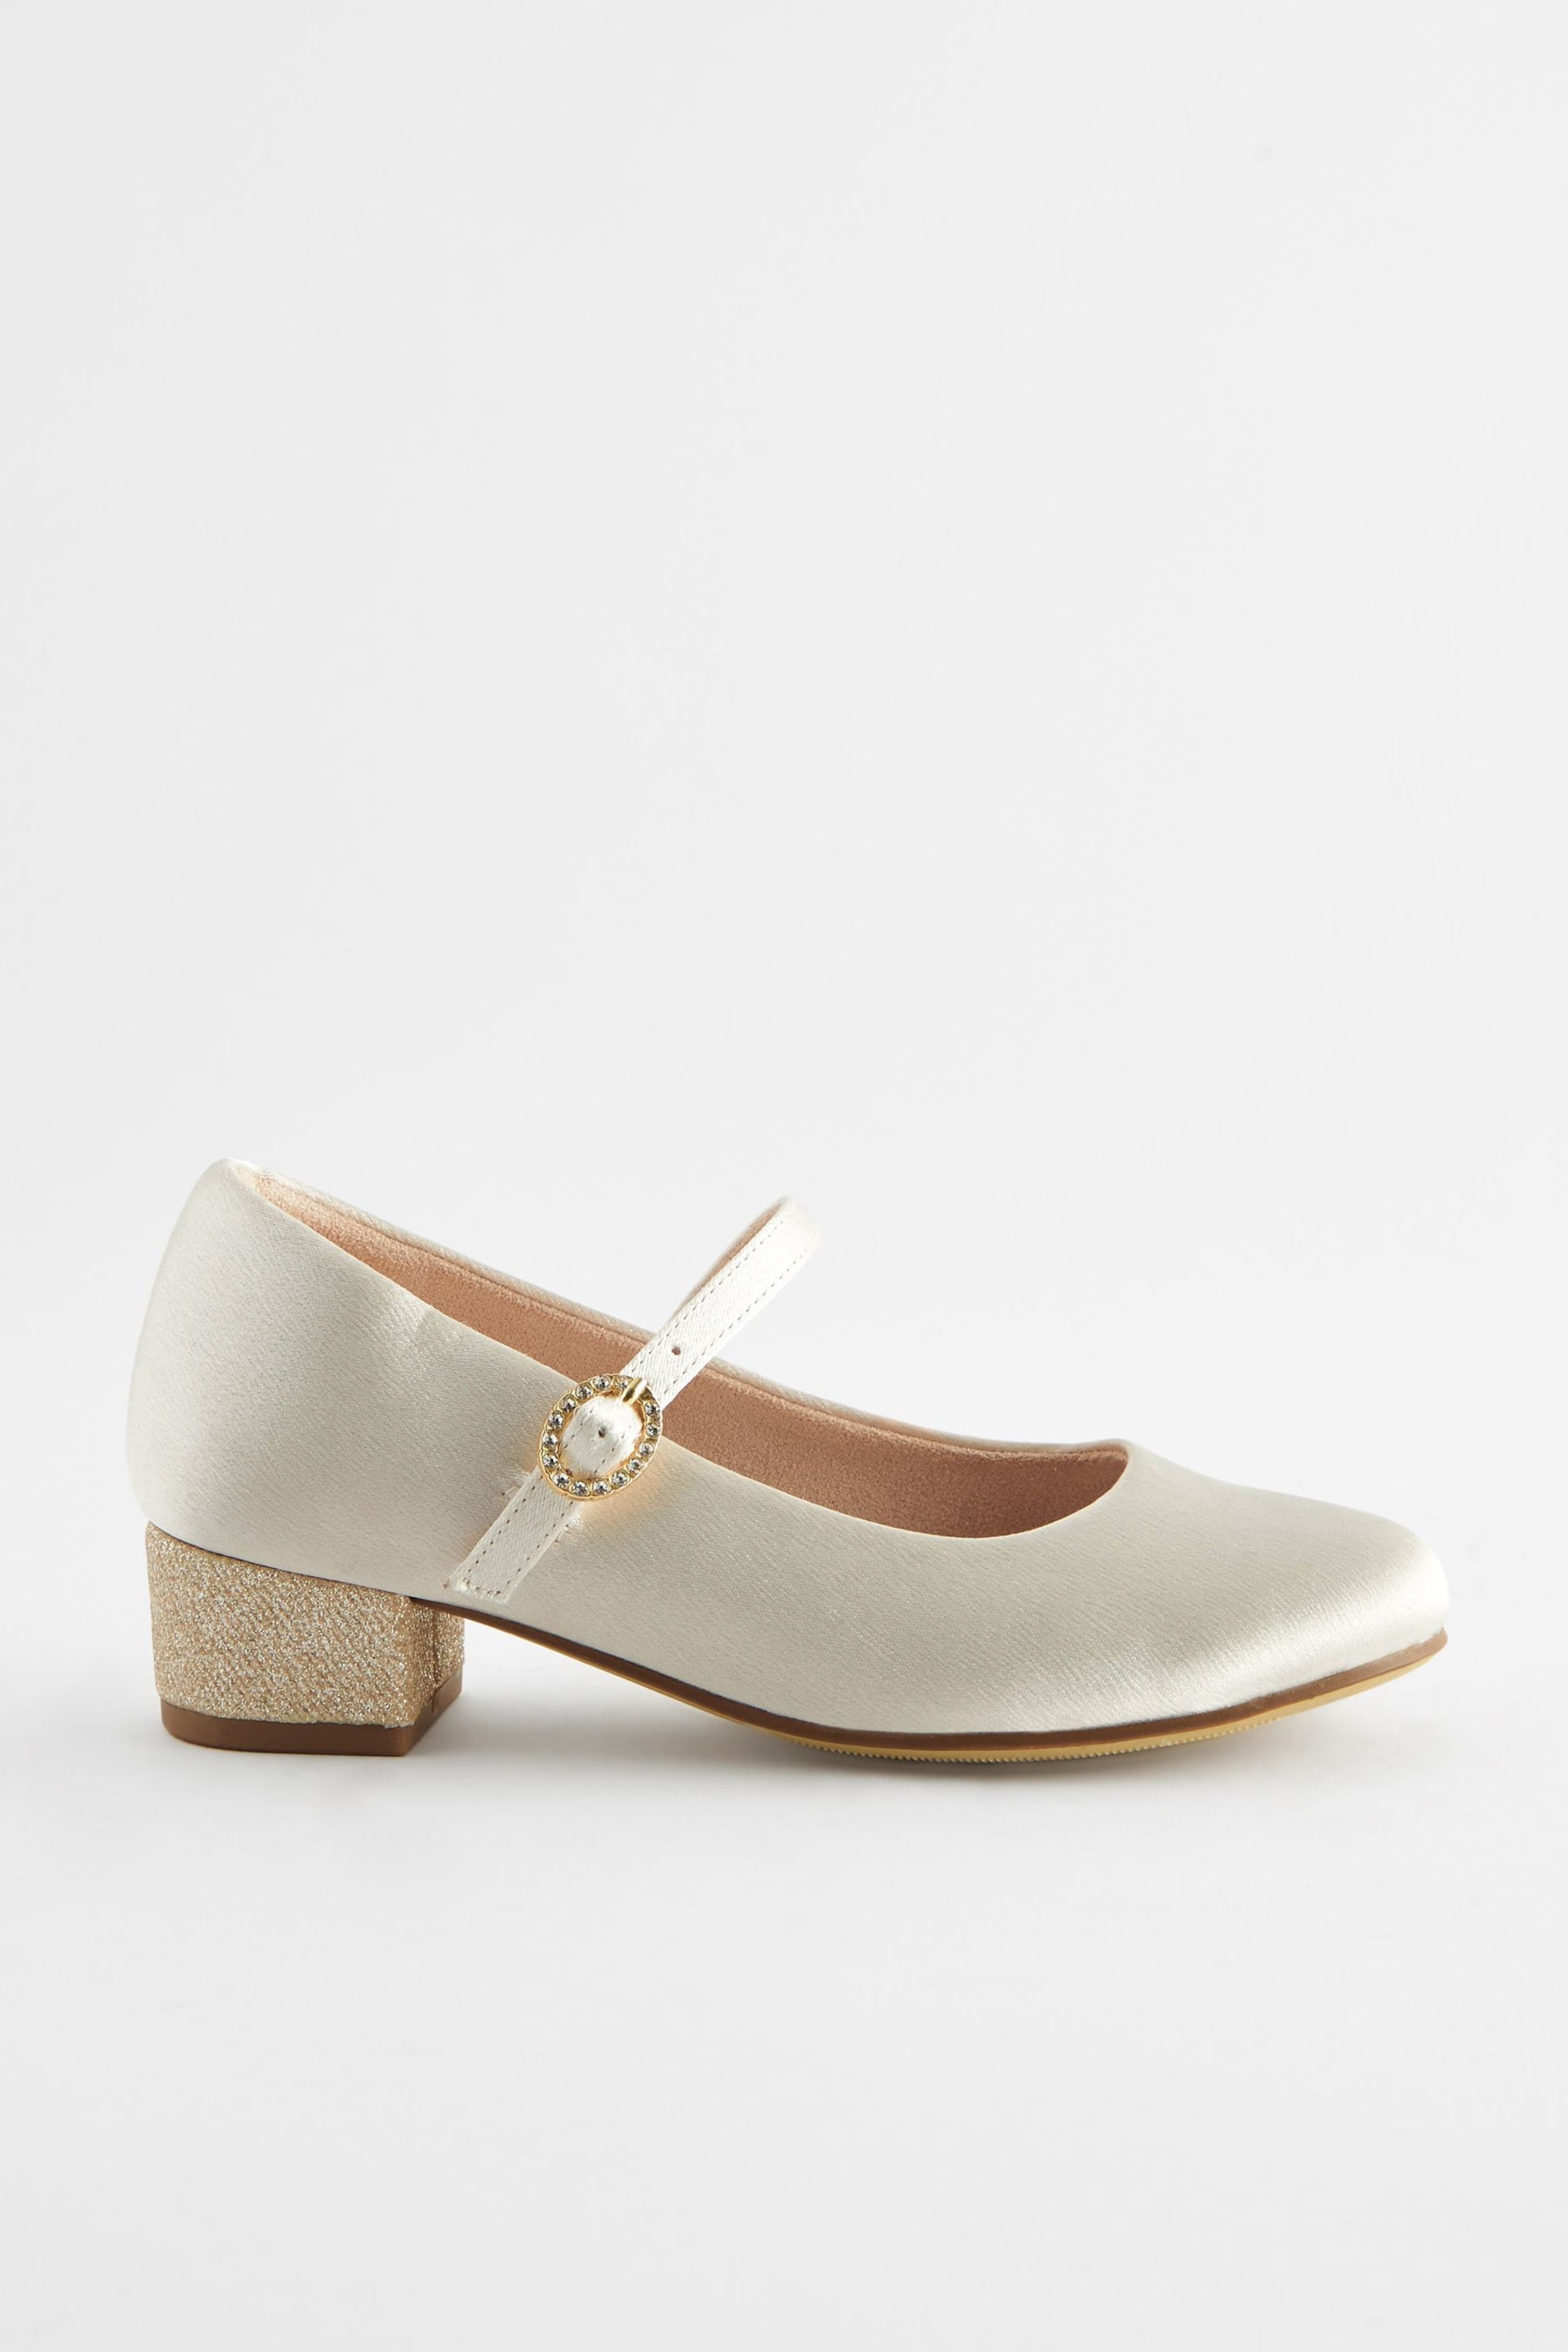 Ivory Satin Stain Resistant Standard Fit (F) Mary Jane Bridesmaid Heel Shoes - Image 3 of 6